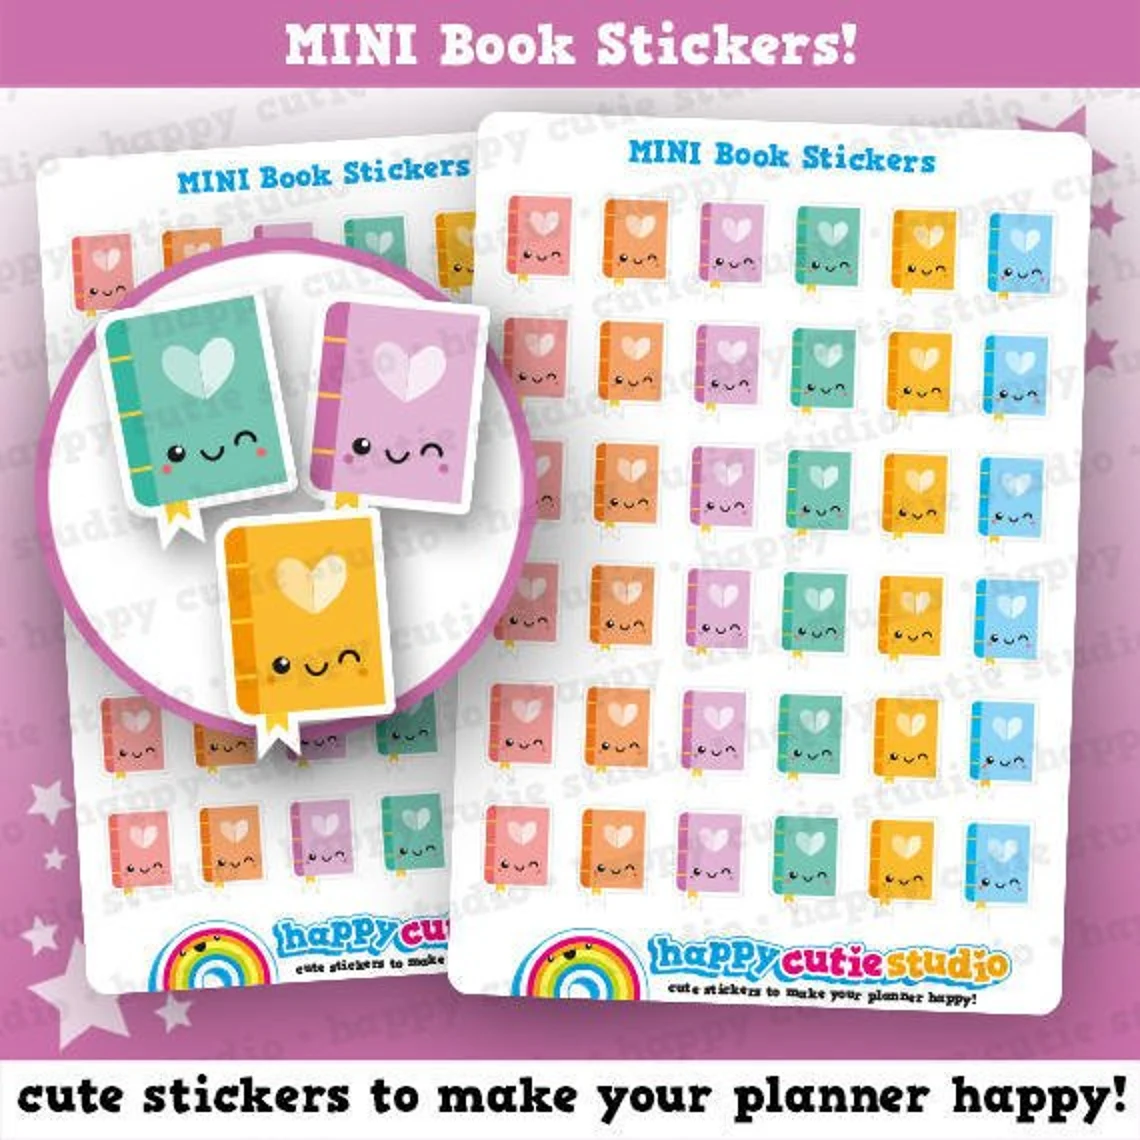 set of colorful mini cartoon book stickers with a winking smiley face 